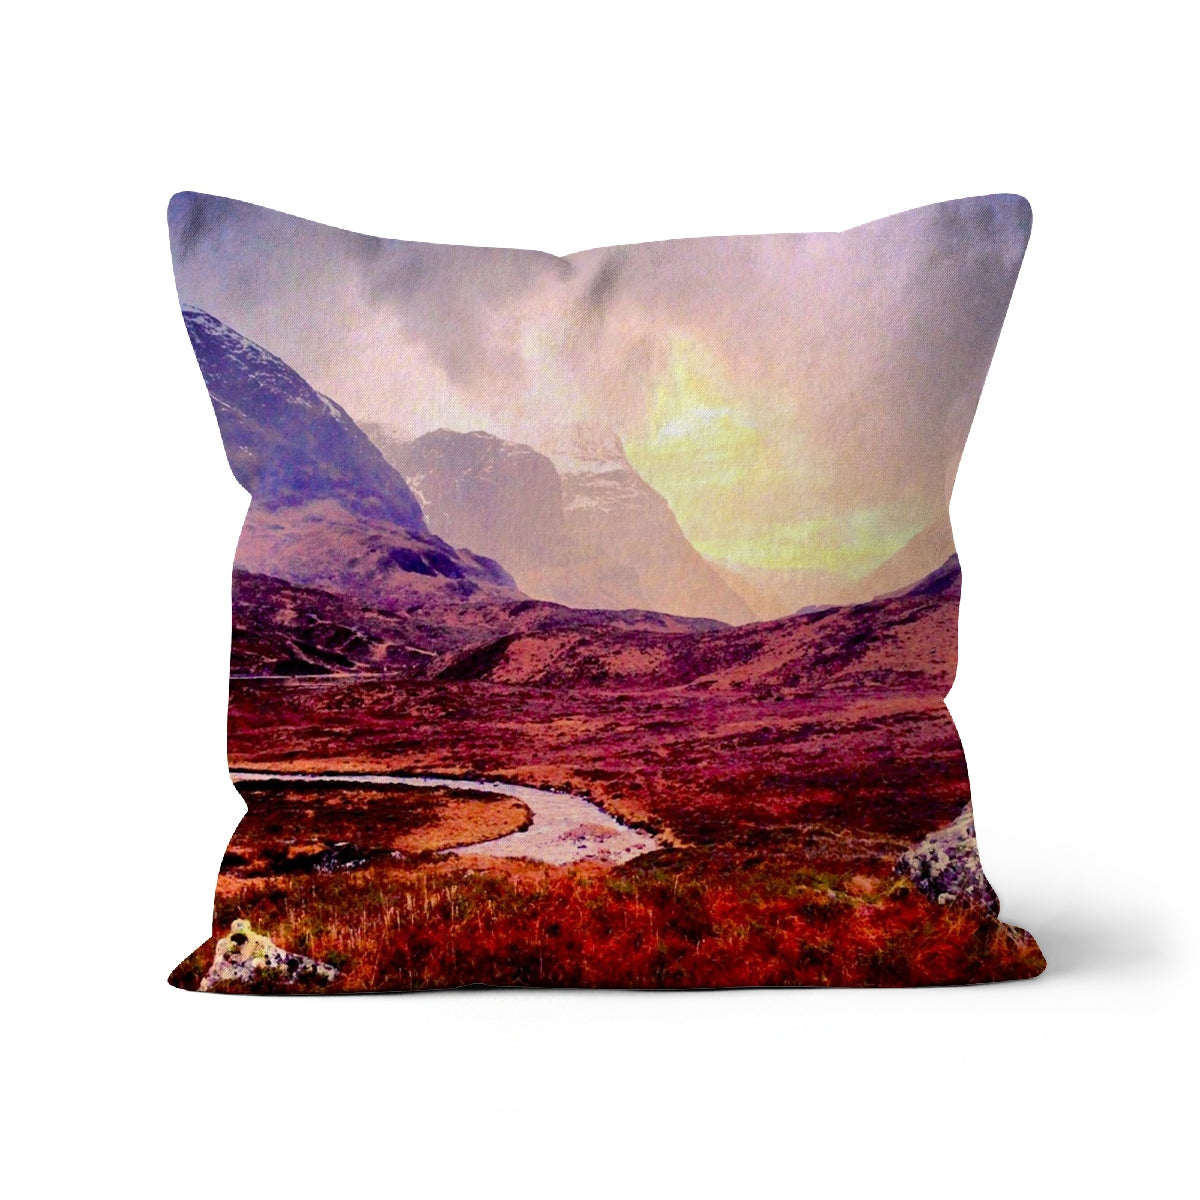 A Brooding Glencoe Art Gifts Cushion-Cushions-Glencoe Art Gallery-Faux Suede-12"x12"-Paintings, Prints, Homeware, Art Gifts From Scotland By Scottish Artist Kevin Hunter